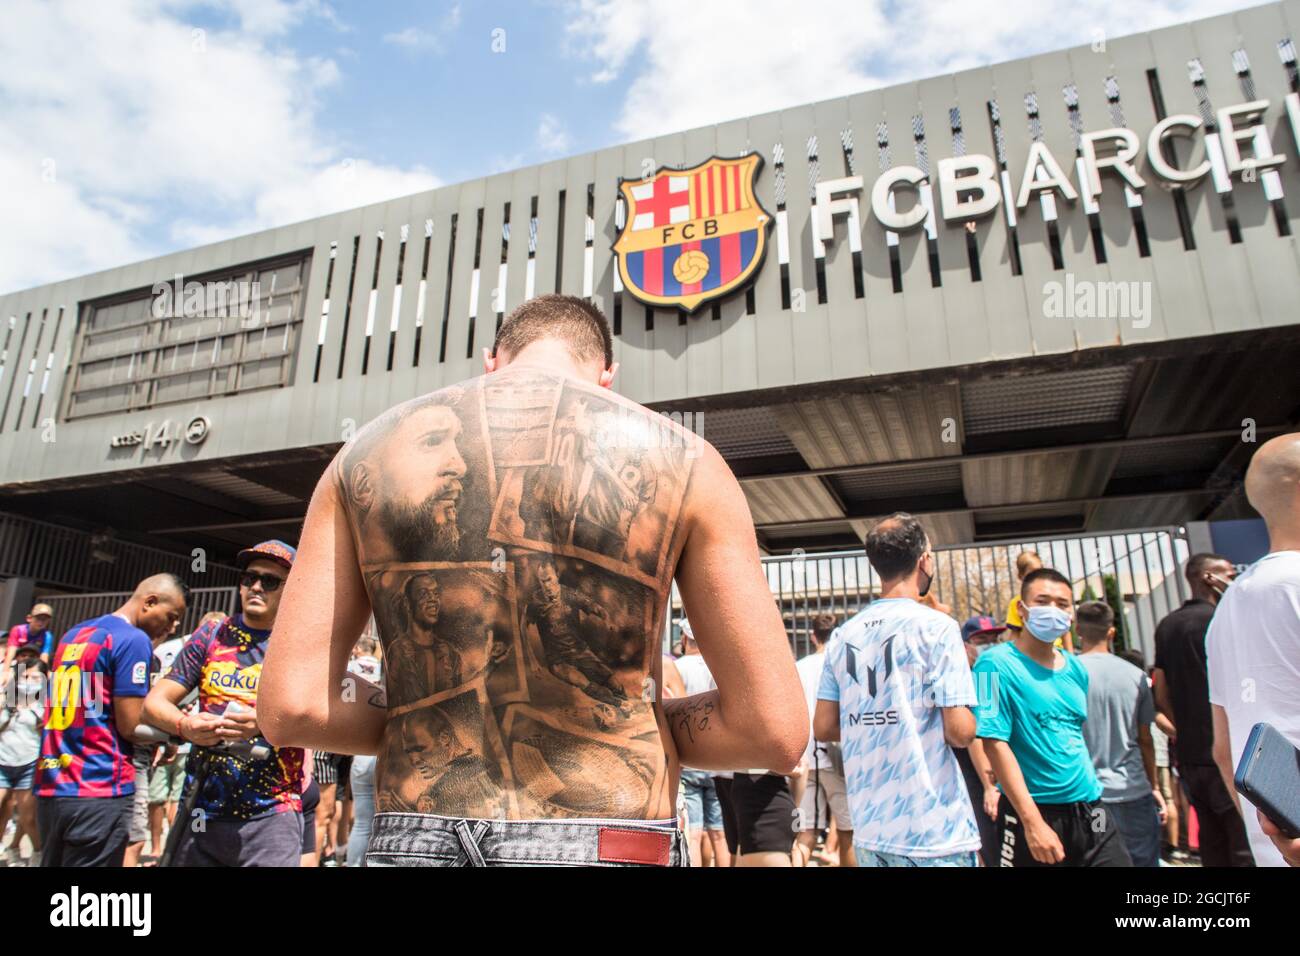 Barcelona, Catalonia, Spain. 8th Aug, 2021. Lionel Messi fan with a tattoo on his back with the face of Messi and other idols of FC Barcelona, such as Ronaldinho (Ronaldo de Assis) and Andres Iniesta is seen at the Camp Nou stadium gate.Lionel Messi fan with a FC Barcelona Messi 10 shirt is seen at the gate of Camp Nou stadium.Lionel Messi fans are seen with FC Barcelona's Messi 10 shirt at the Camp Nou stadium gate.At the time of the press conference of farewell to Lionel Messi from Futbol Club Barcelona, fans of the player were at the door of the Camp Nou stadium to try to say goodbye to Stock Photo